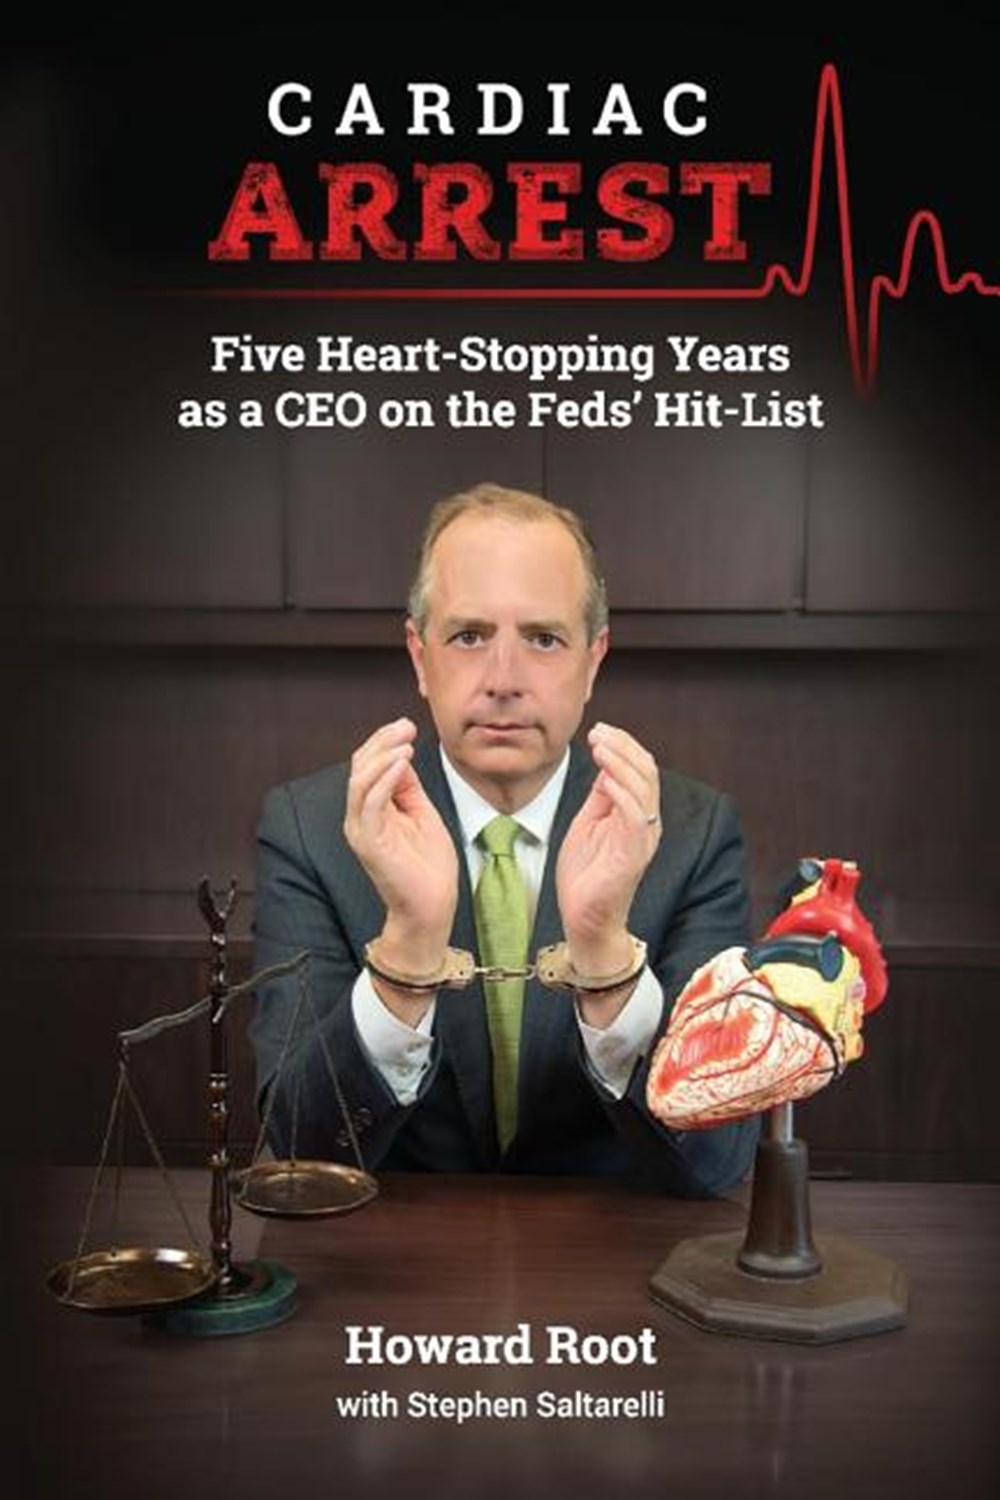 Cardiac Arrest, Volume 1 Five Heart-Stopping Years as a CEO on the Feds' Hit-List